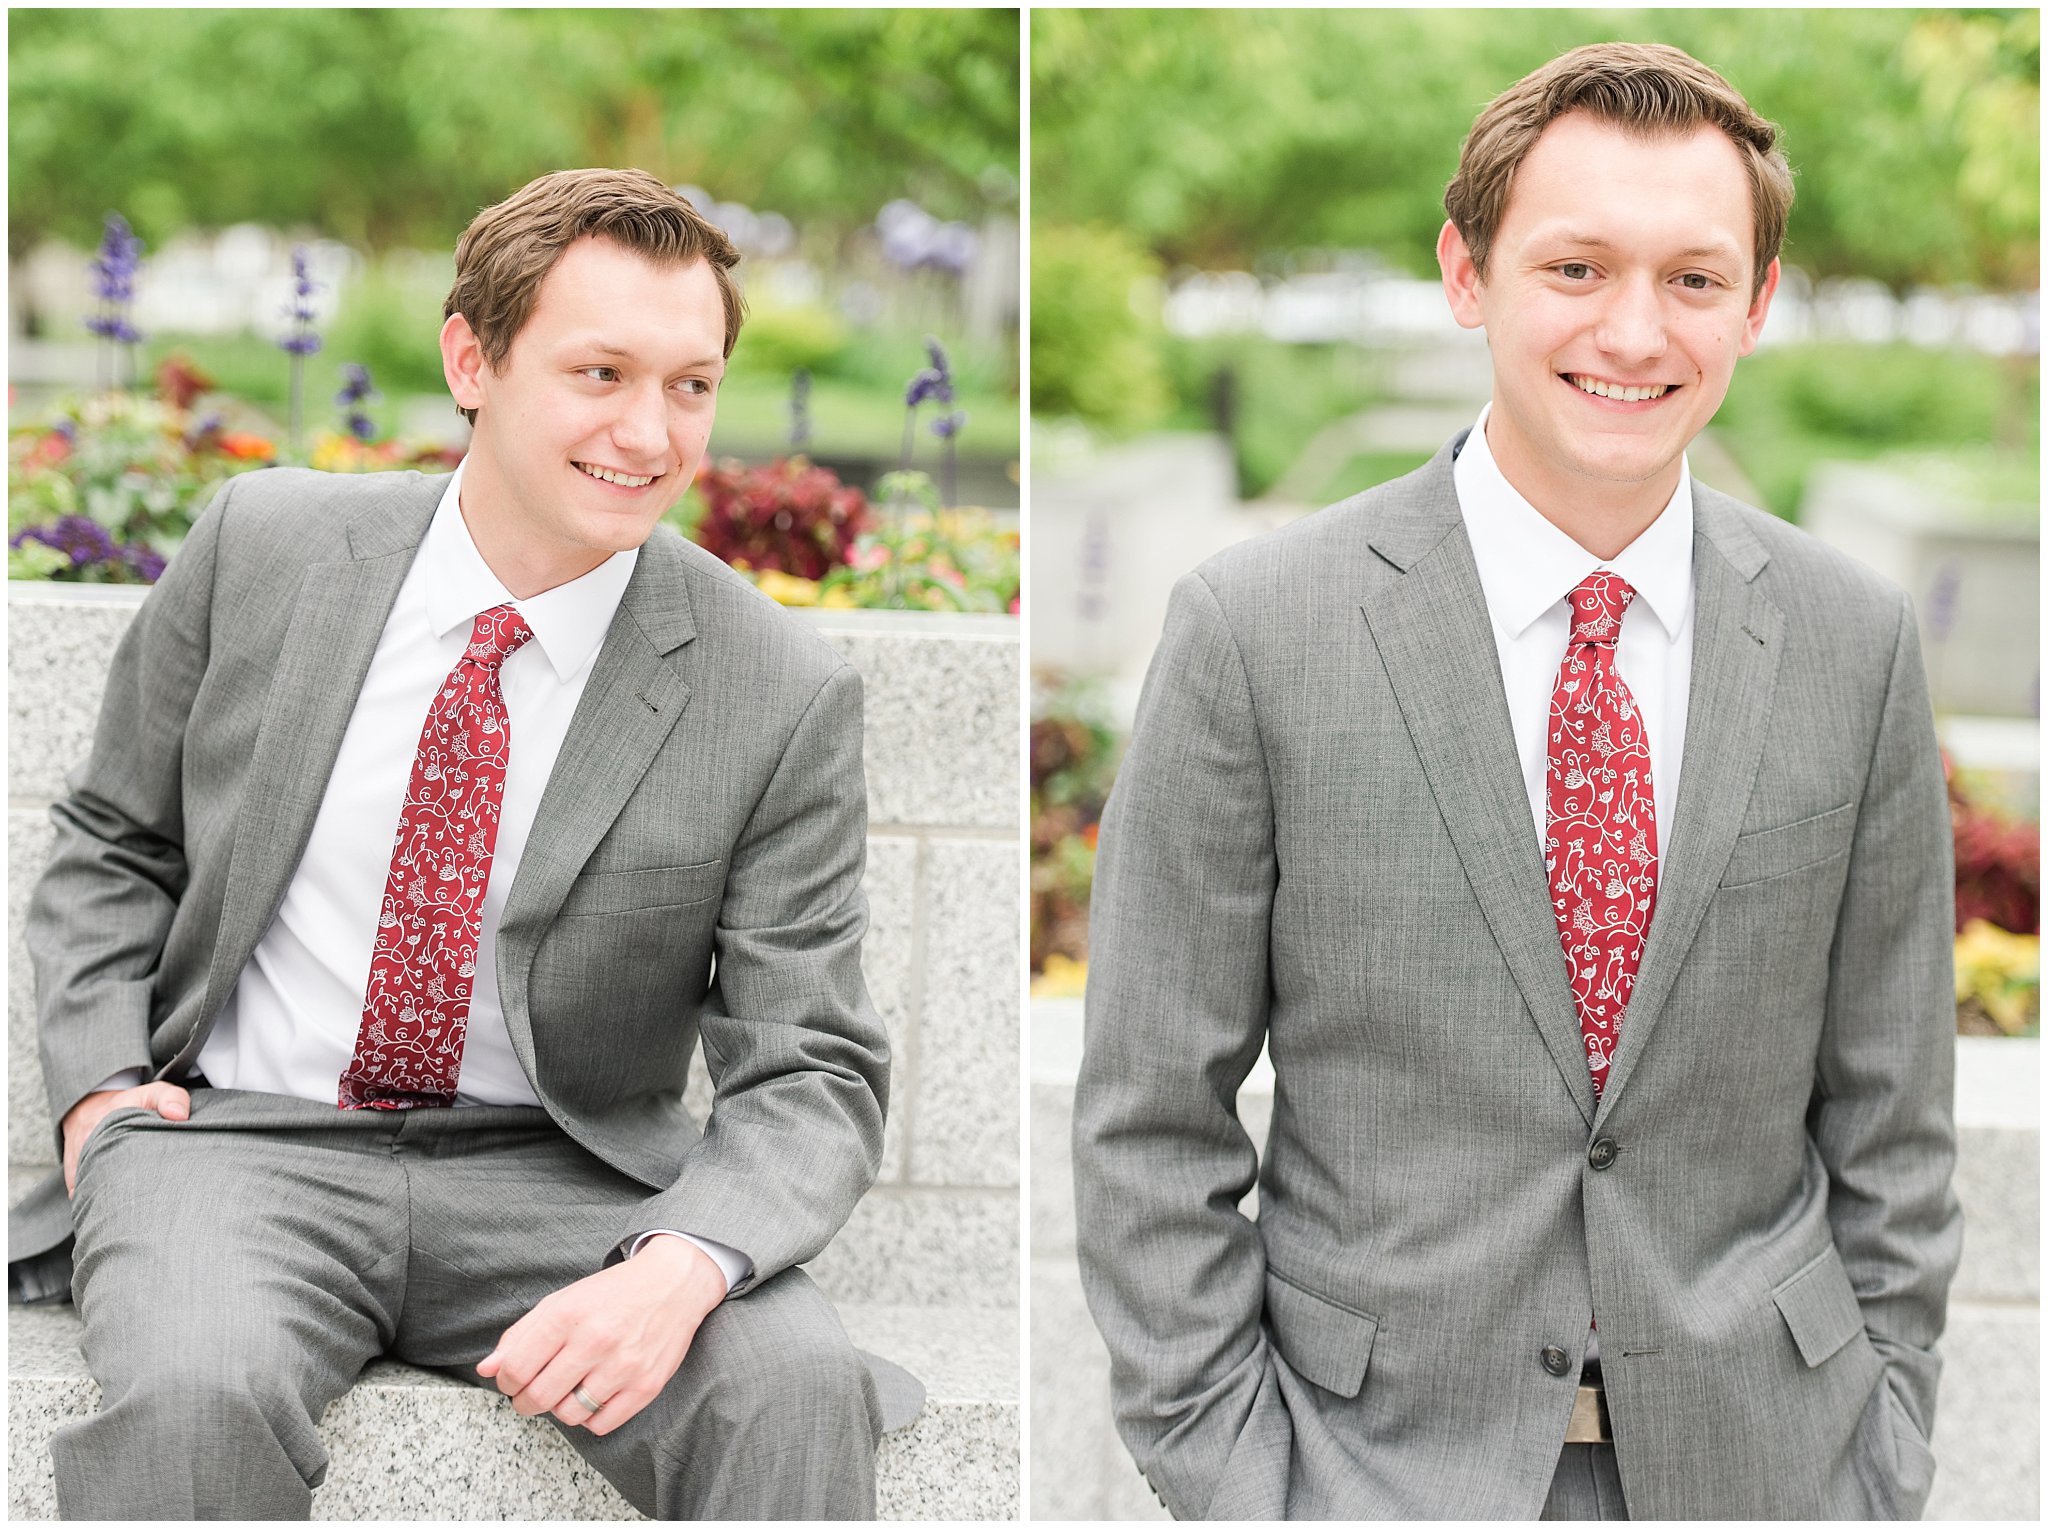 Groom in grey suit with maroon tie | Grey, gold, and maroon wedding colors | Draper Temple Spring Formal Session | Jessie and Dallin Photography